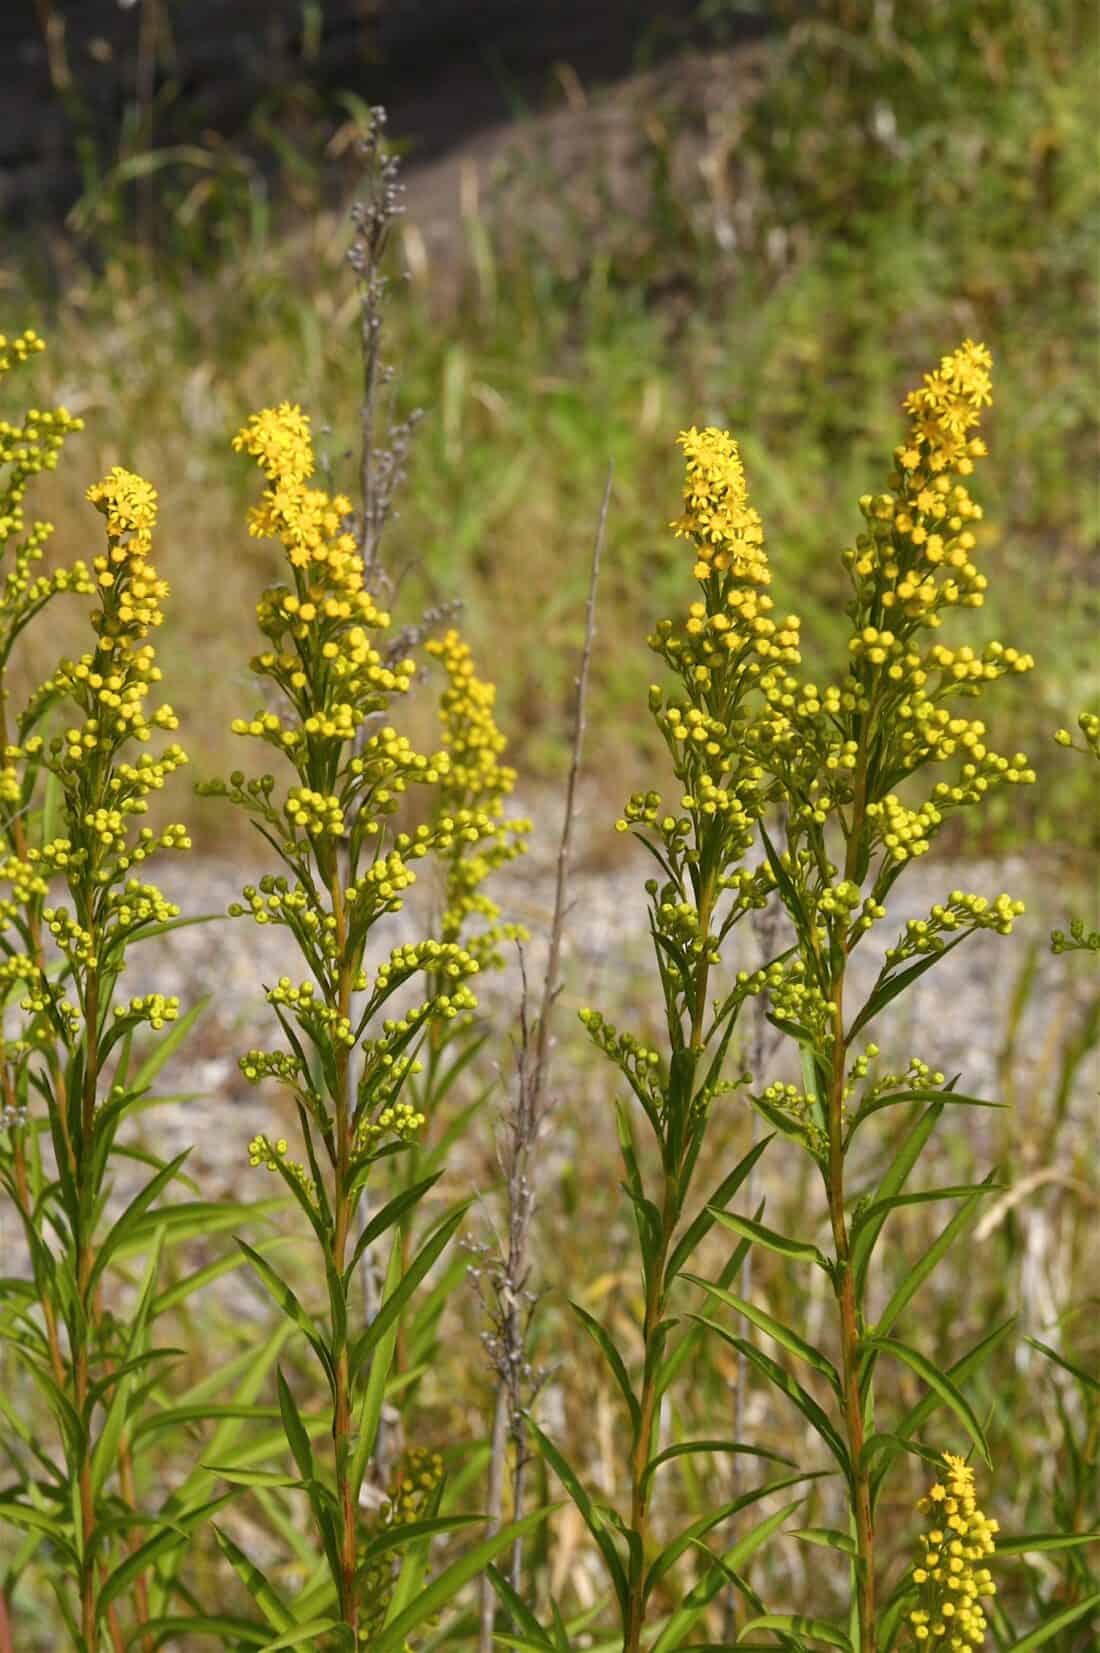 Yellow wildflowers growing against a blurred natural backdrop. Solidago nemoralis - Grey Goldenrod